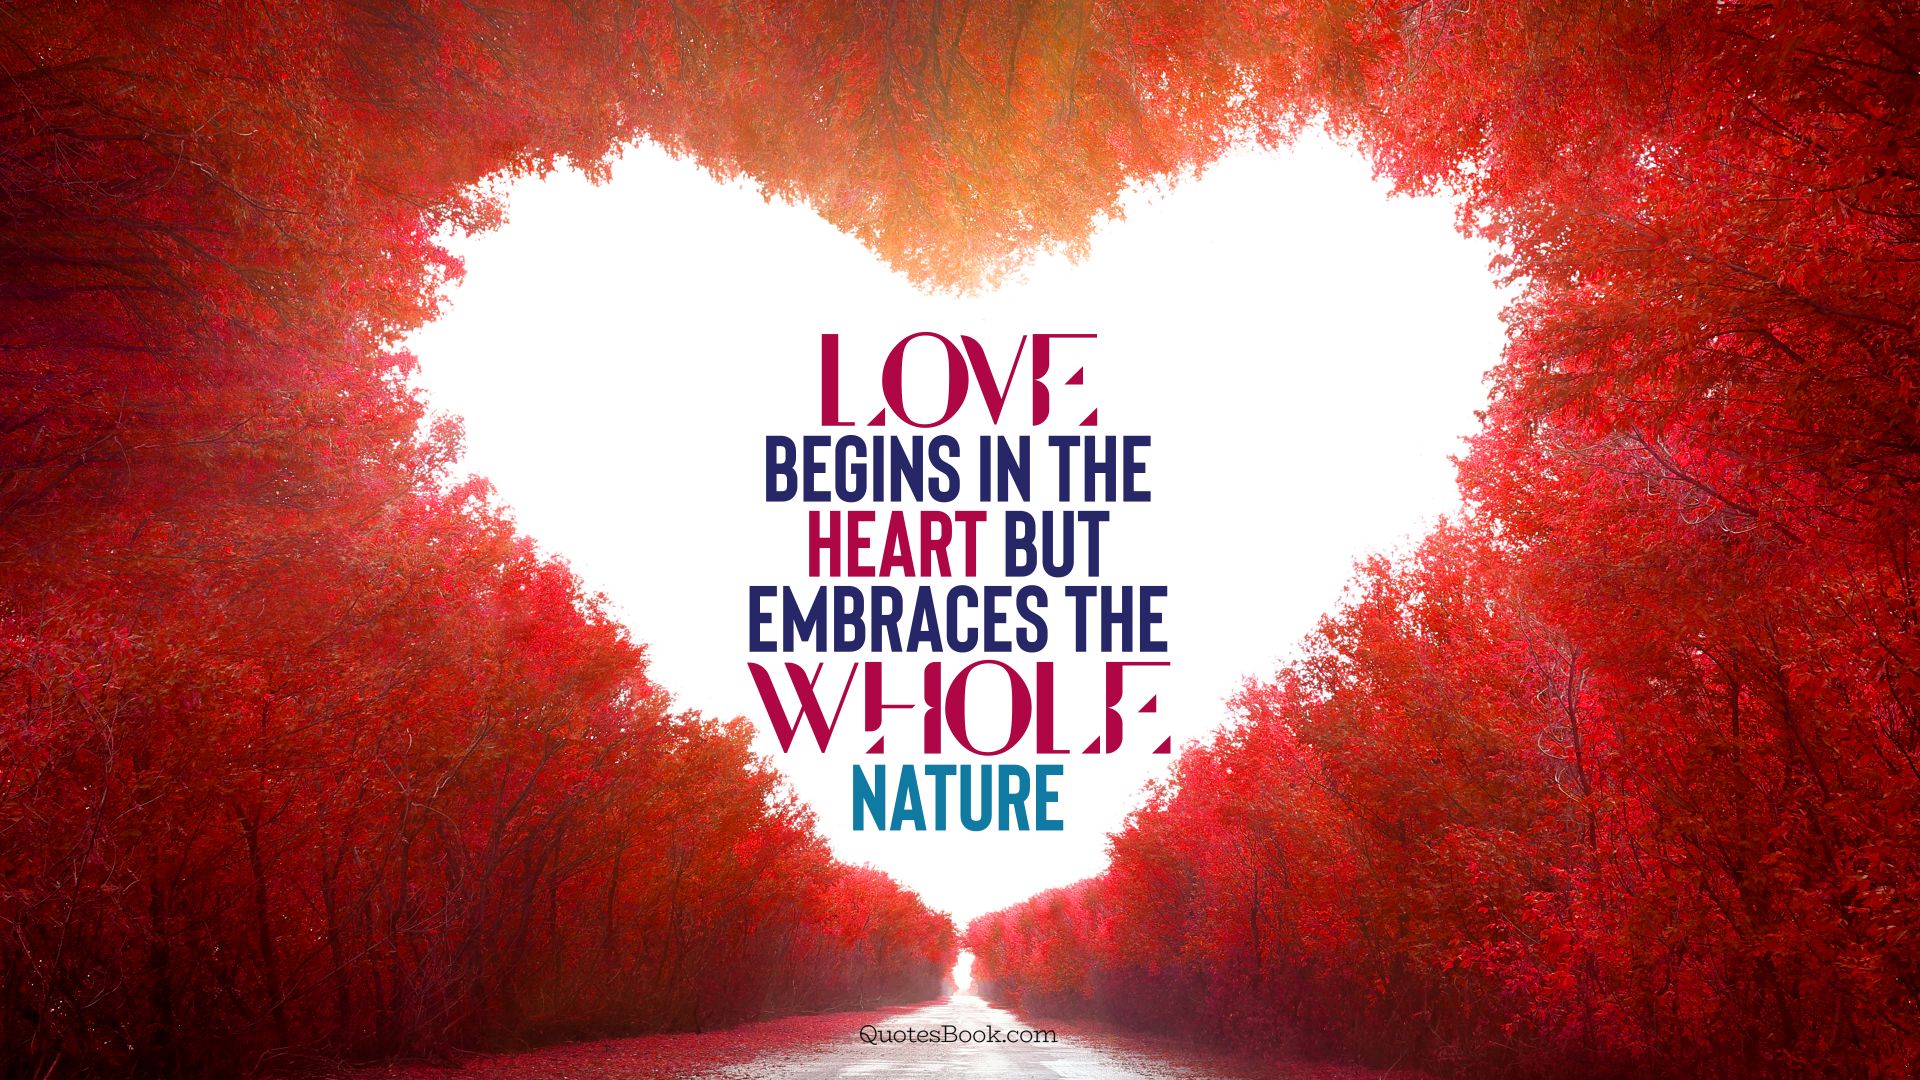 Love begins in the heart but embraces the whole nature. - Quote by QuotesBook